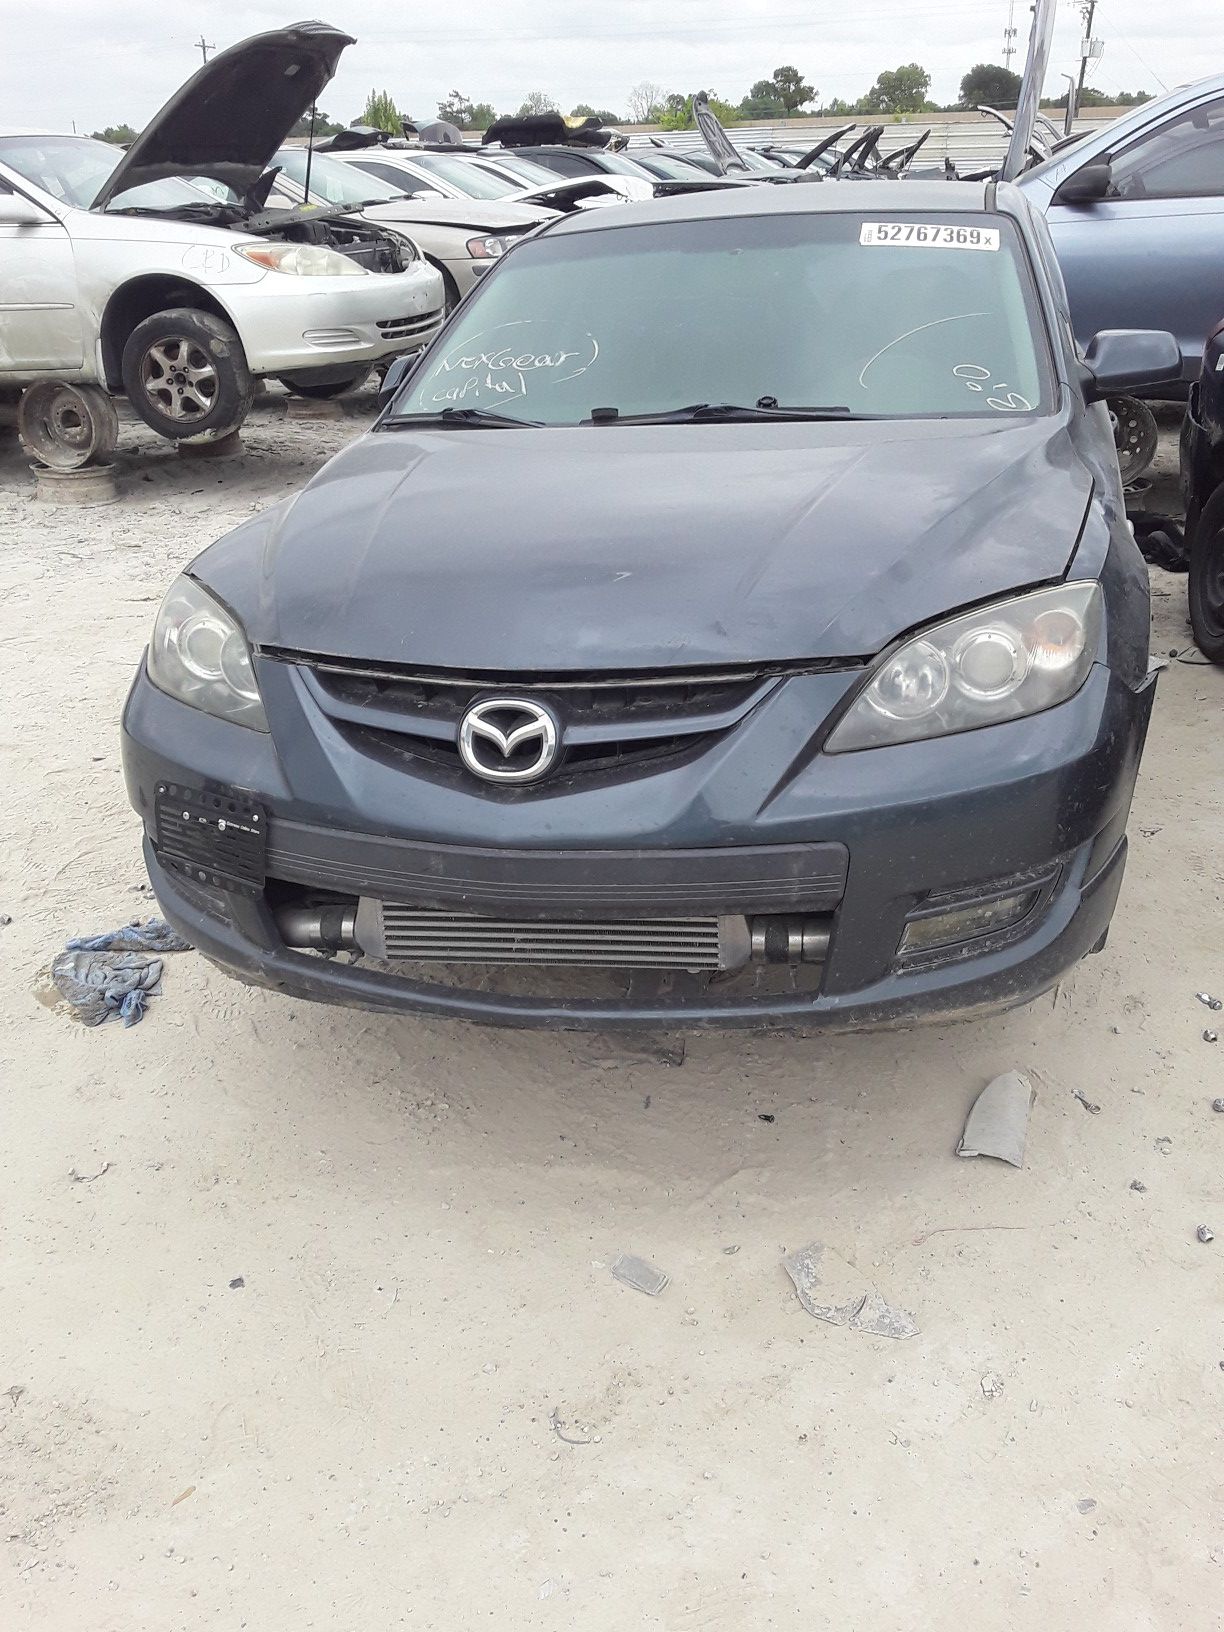 2008 Mazda Speed 3 for parts